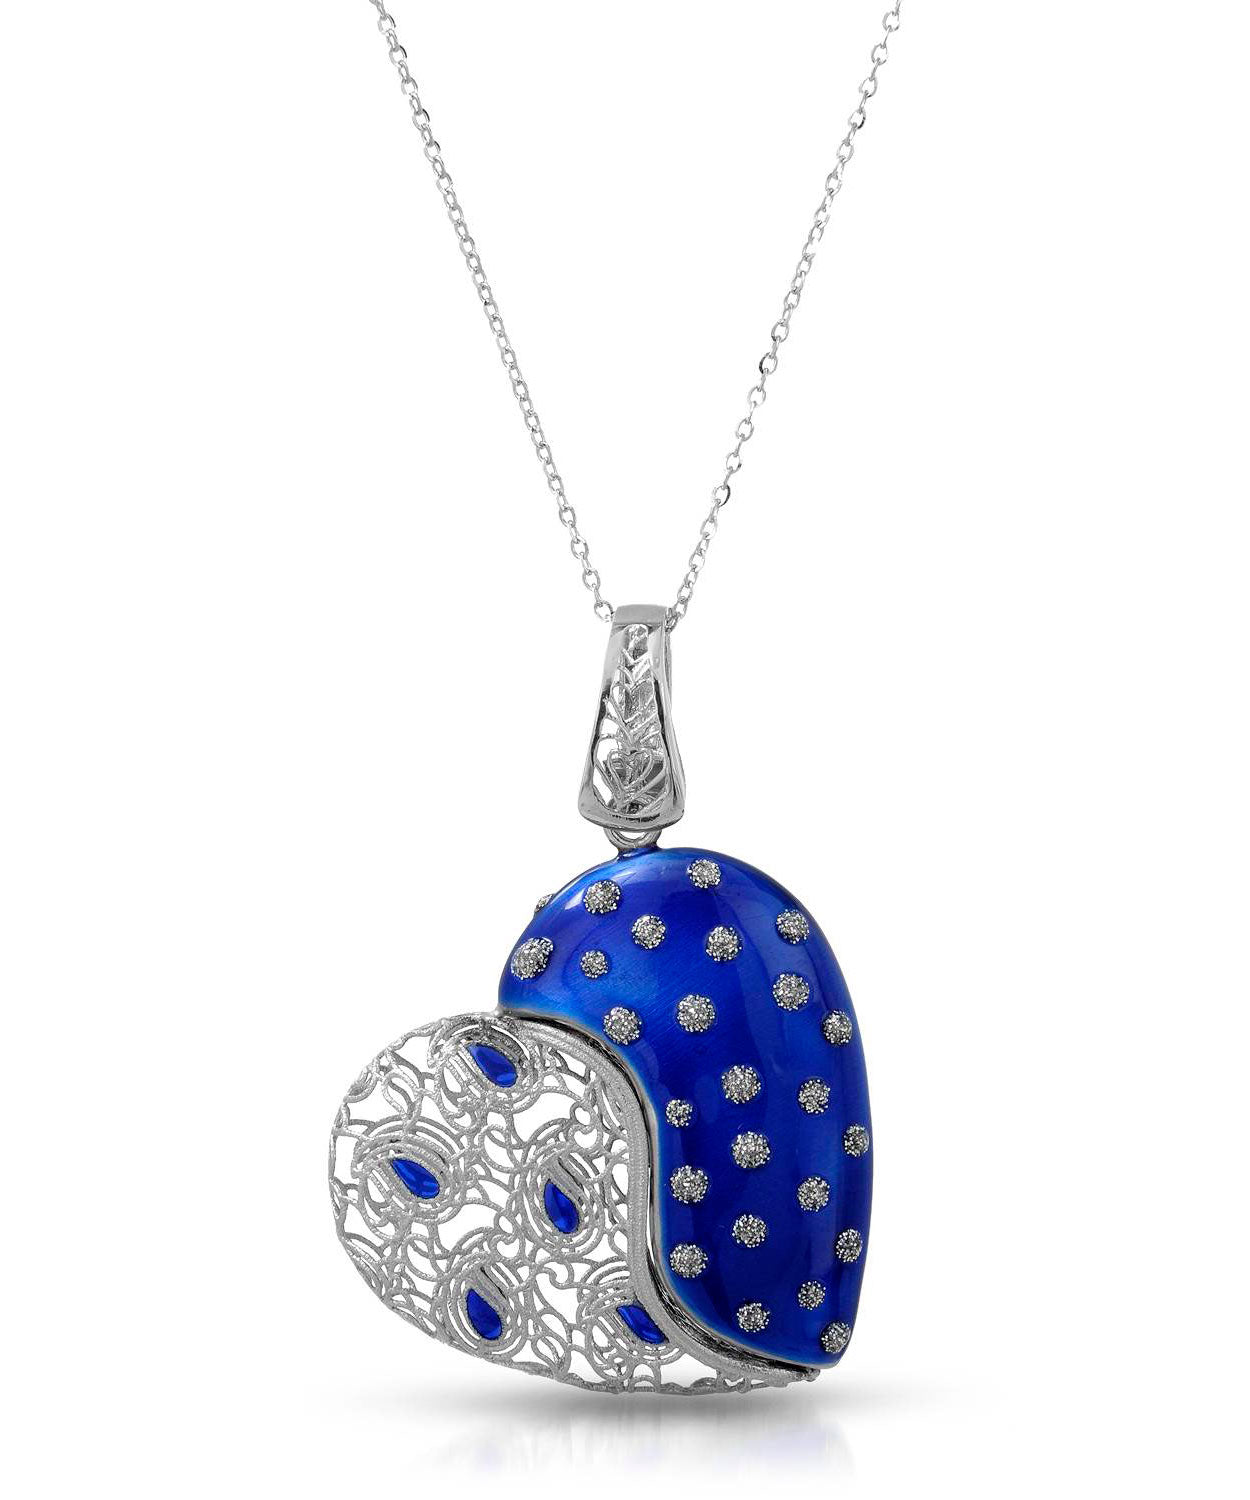 Patterns of Love Collection 14k Gold & Enamel Heart Pendant With Chain - Made in Italy View 1